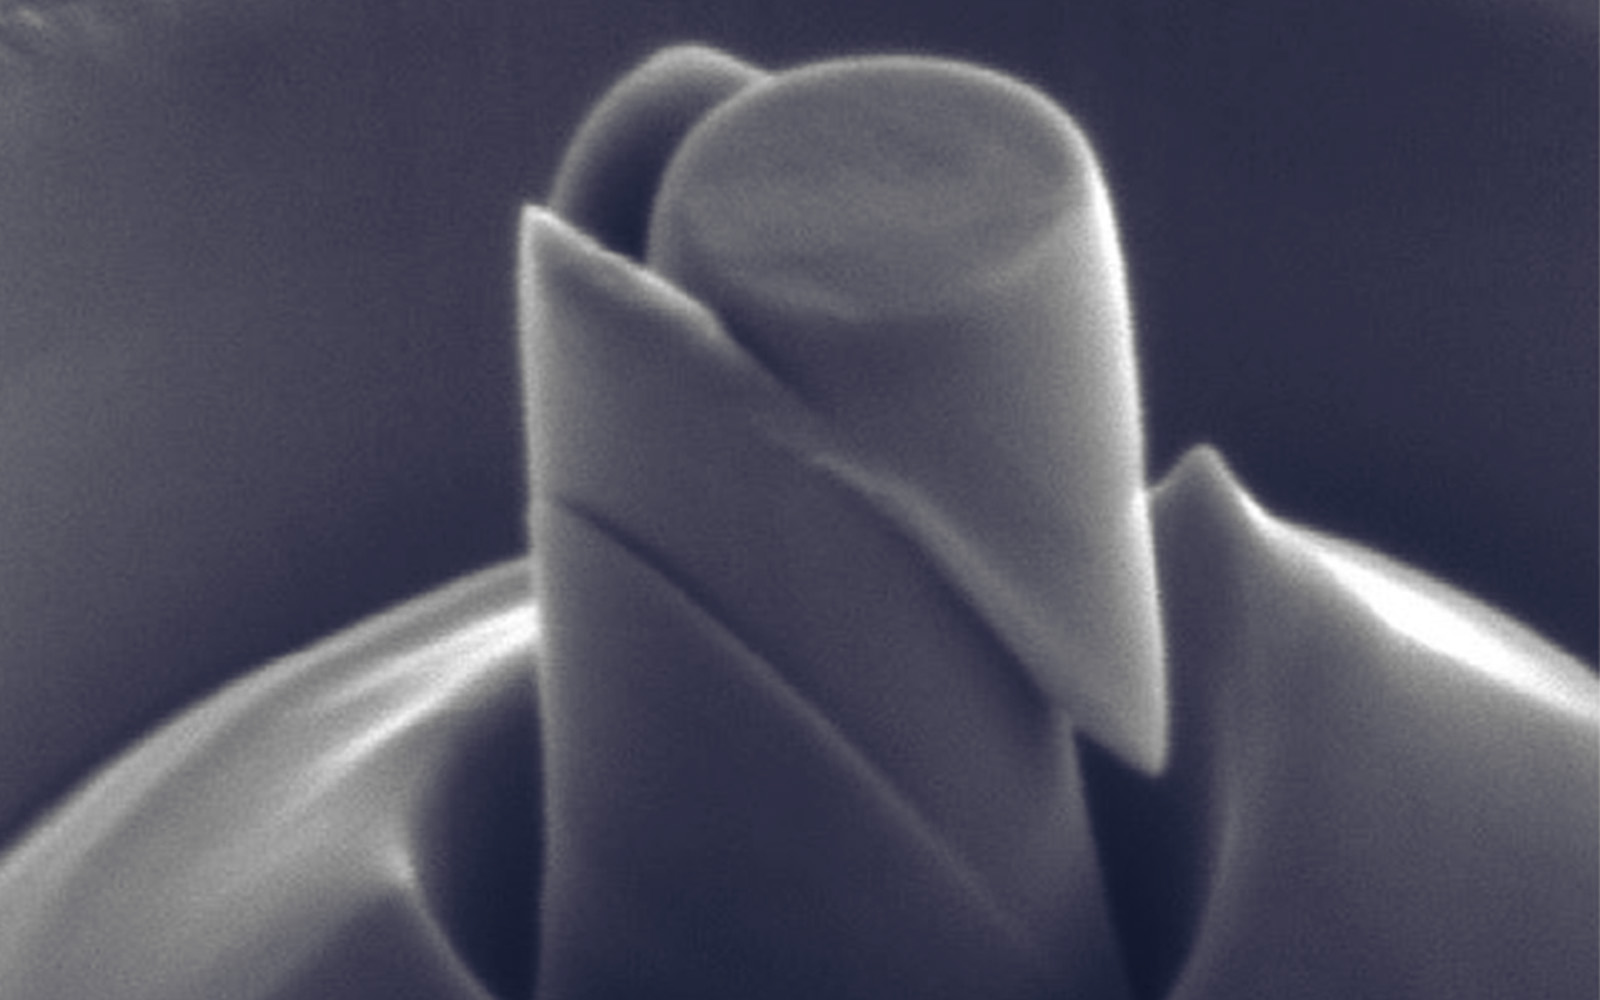 Micro-pillar after compression in an SEM showing shear plane development.